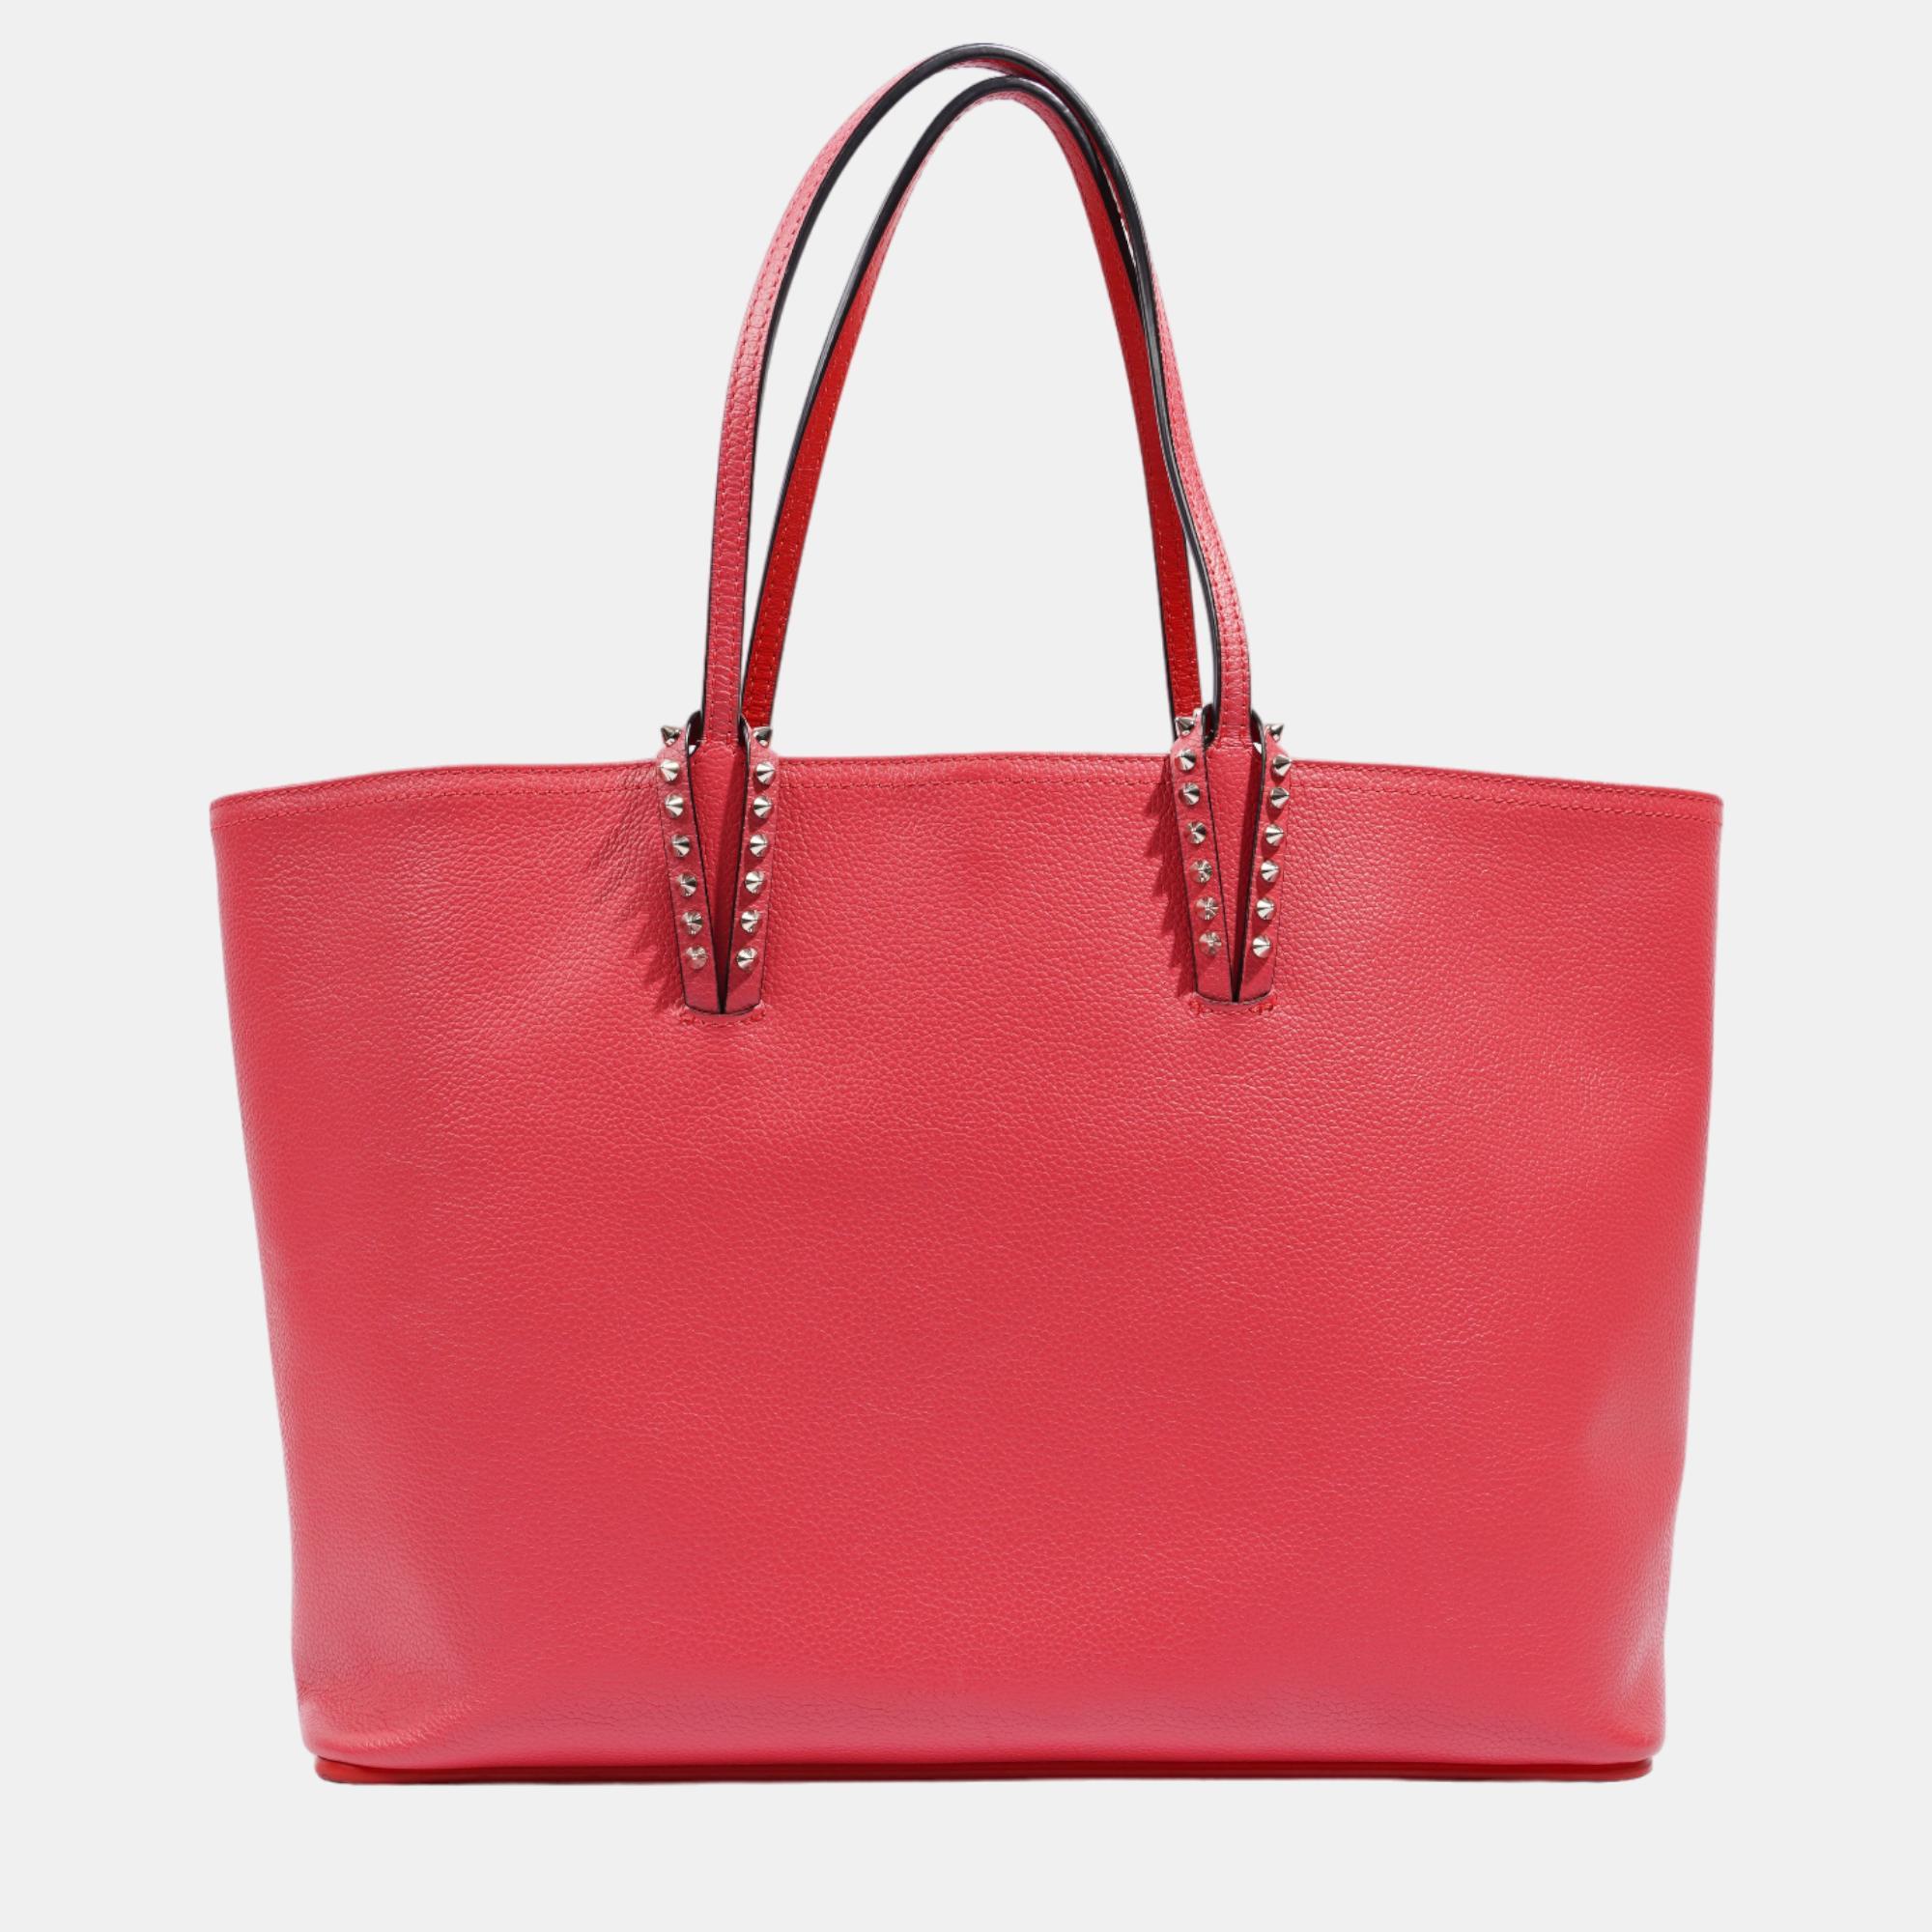 Christian Louboutin Cabas Tote Bag Pink Leather